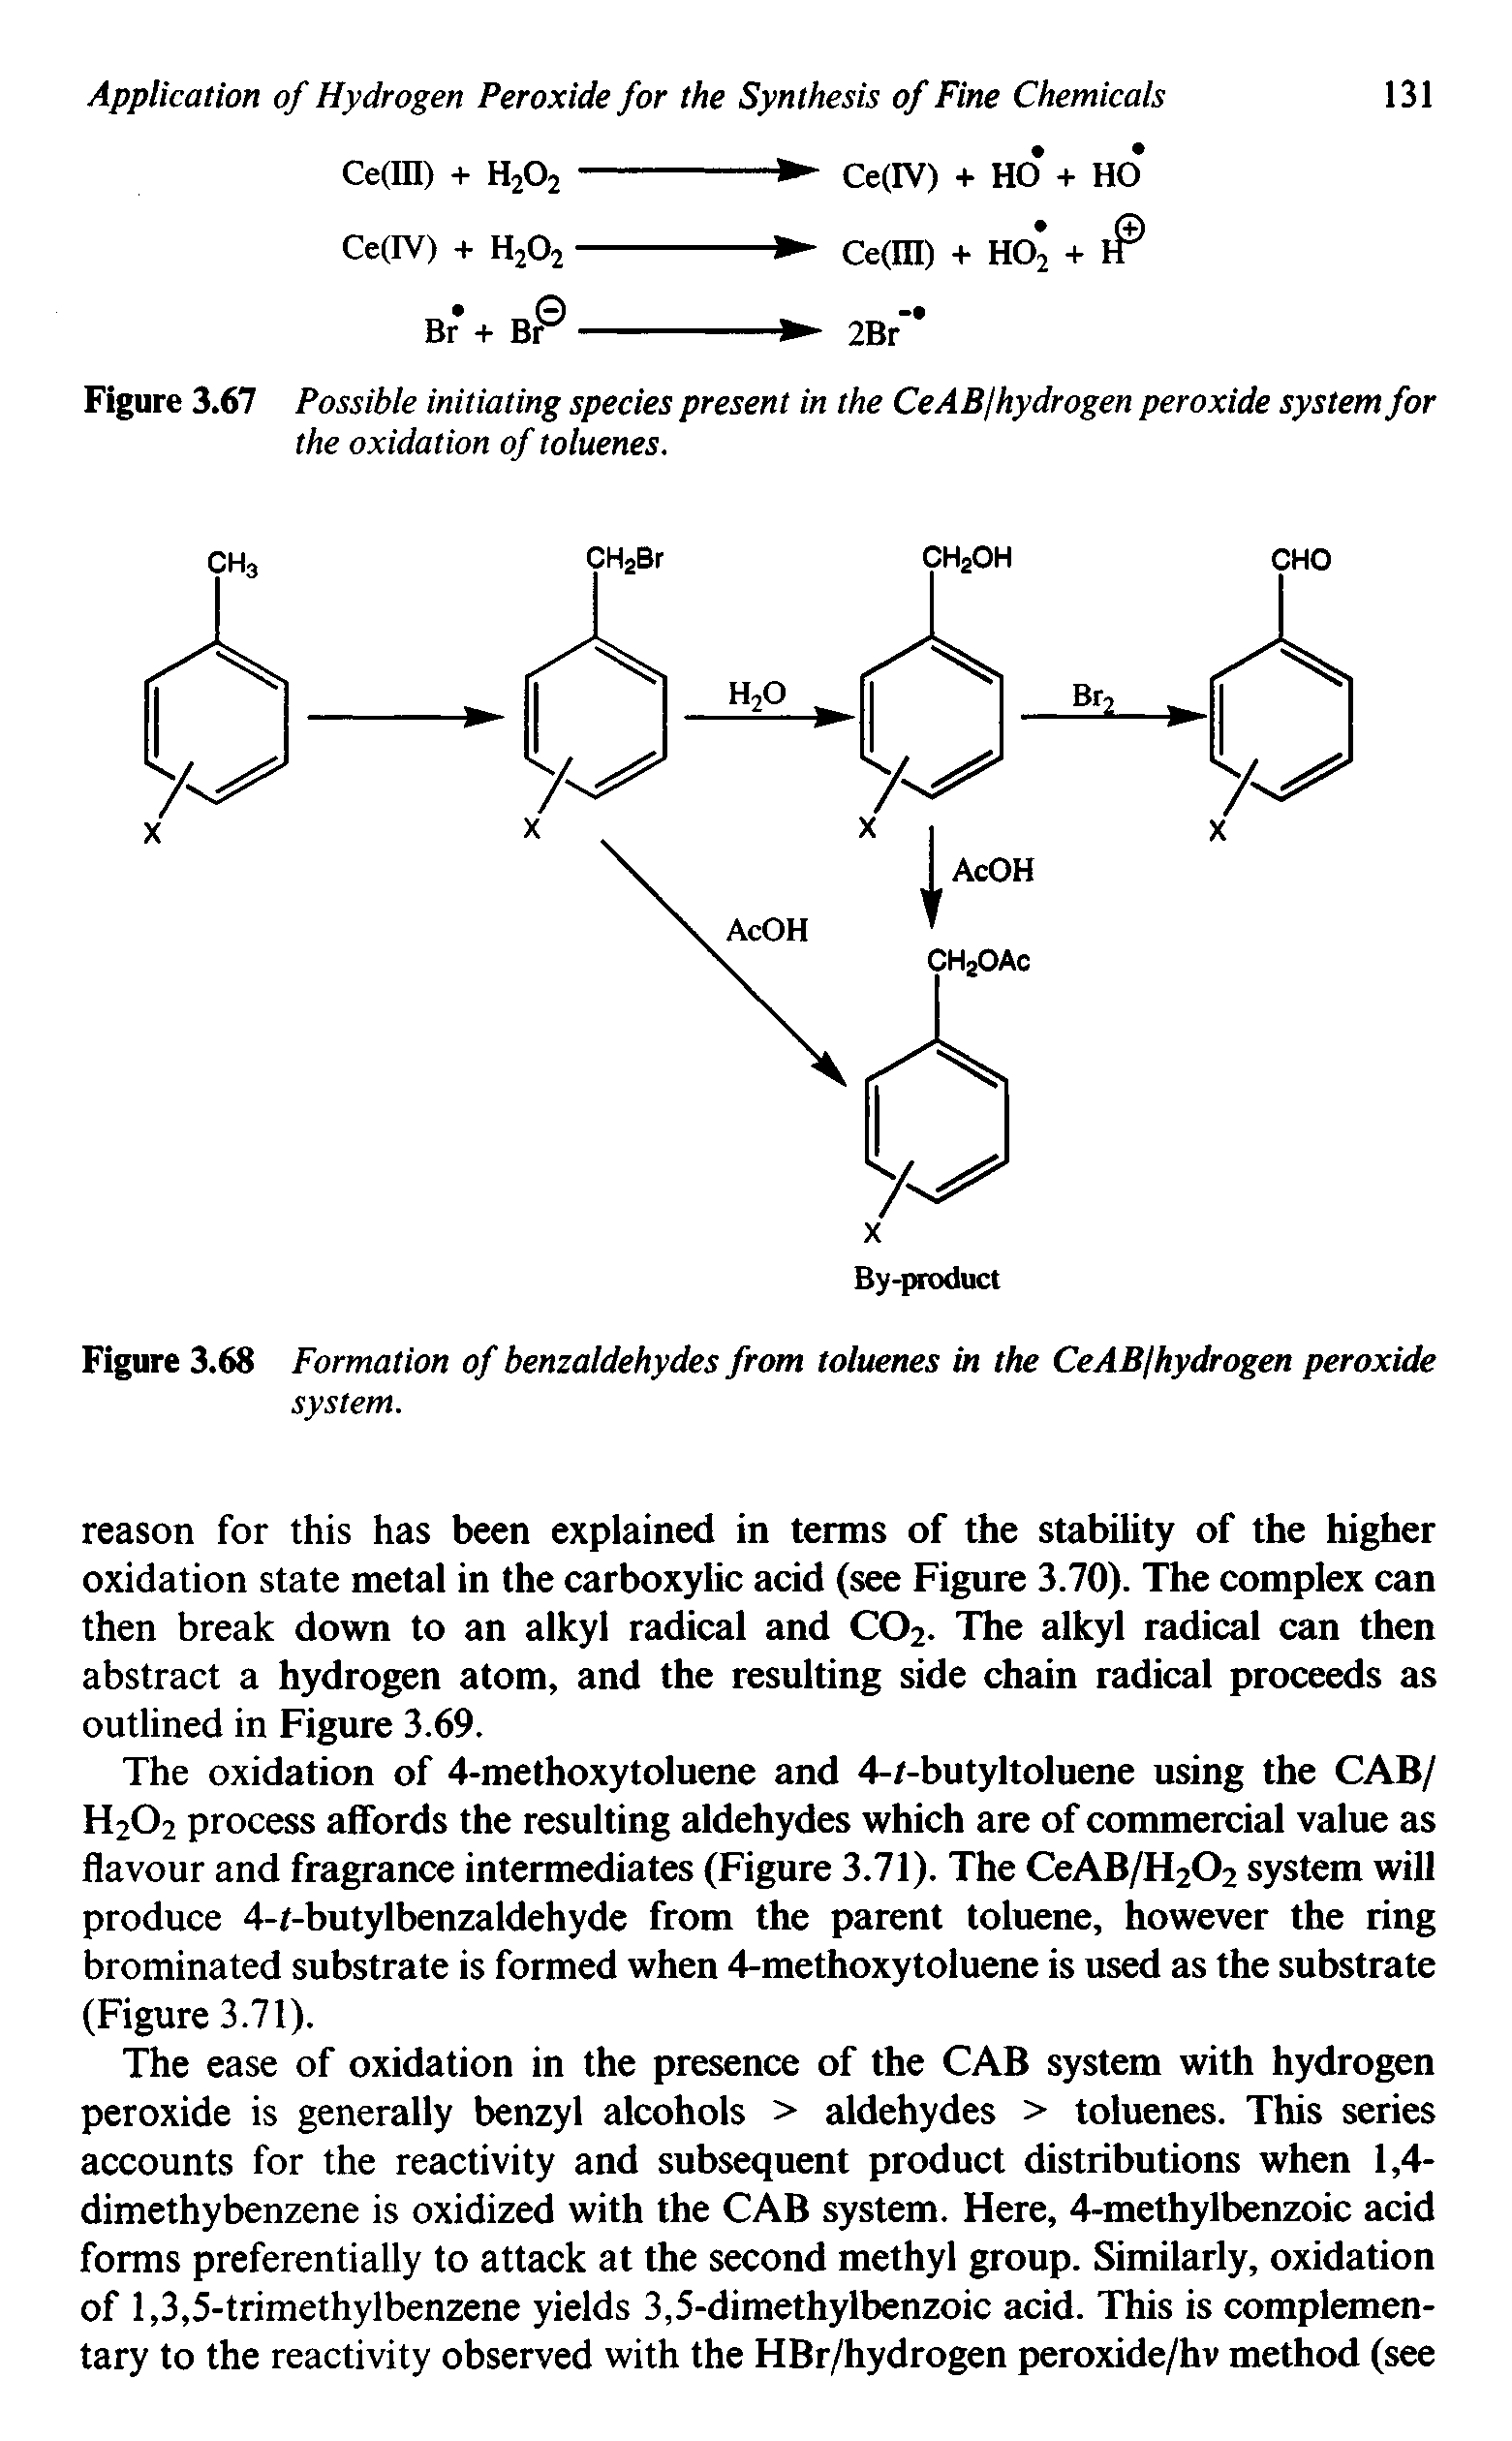 Figure 3.68 Formation of benzaldehydes from toluenes in the CeAB/hydrogen peroxide...